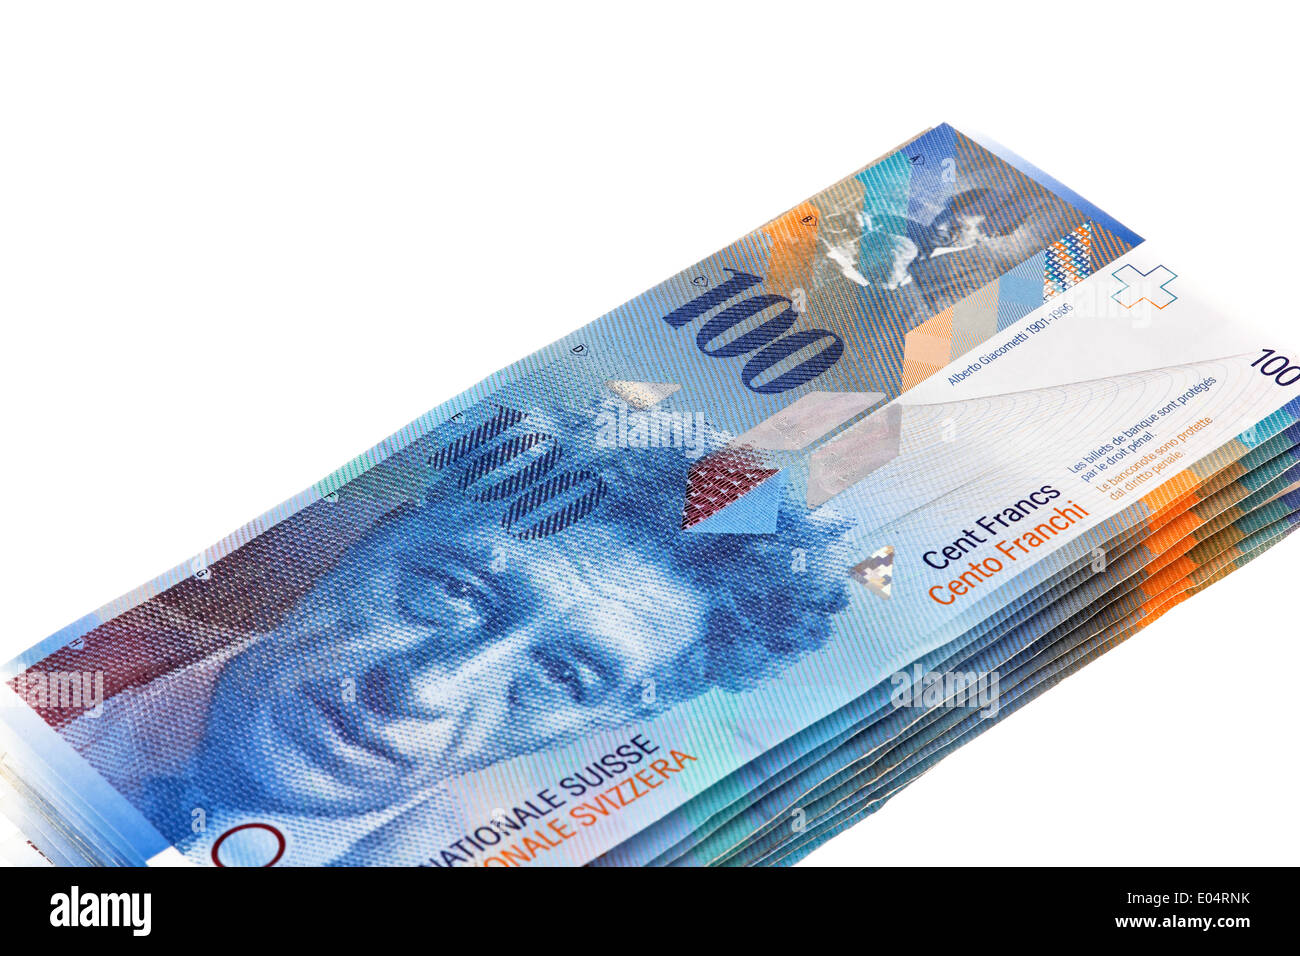 Page 2 - Schweizer Geld High Resolution Stock Photography and Images - Alamy